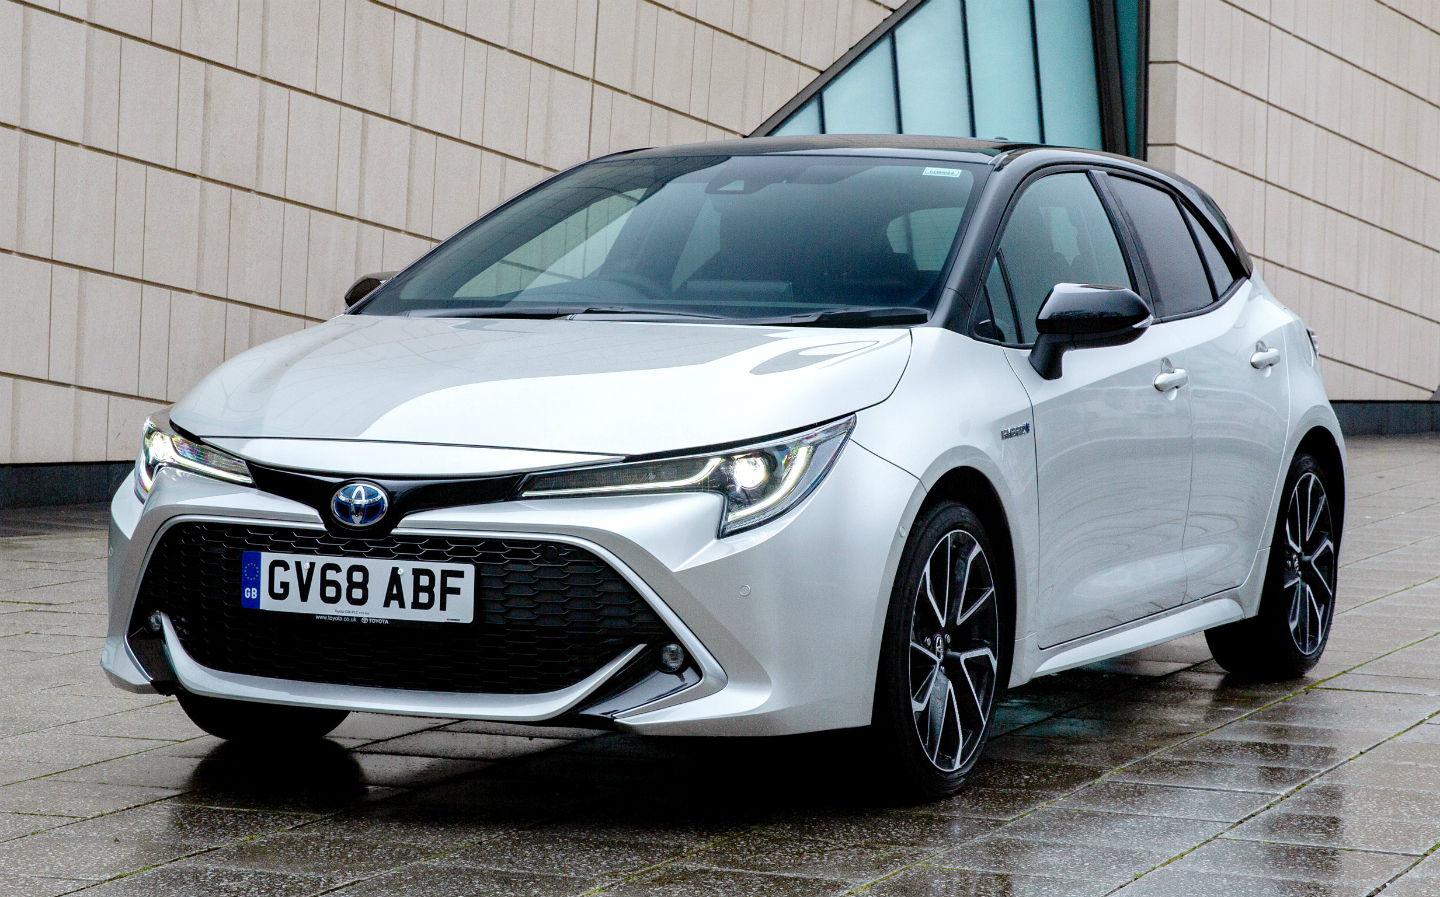 Sunday Times Motor Awards 2019 Best British-Built Car of the Year. Toyota Corolla